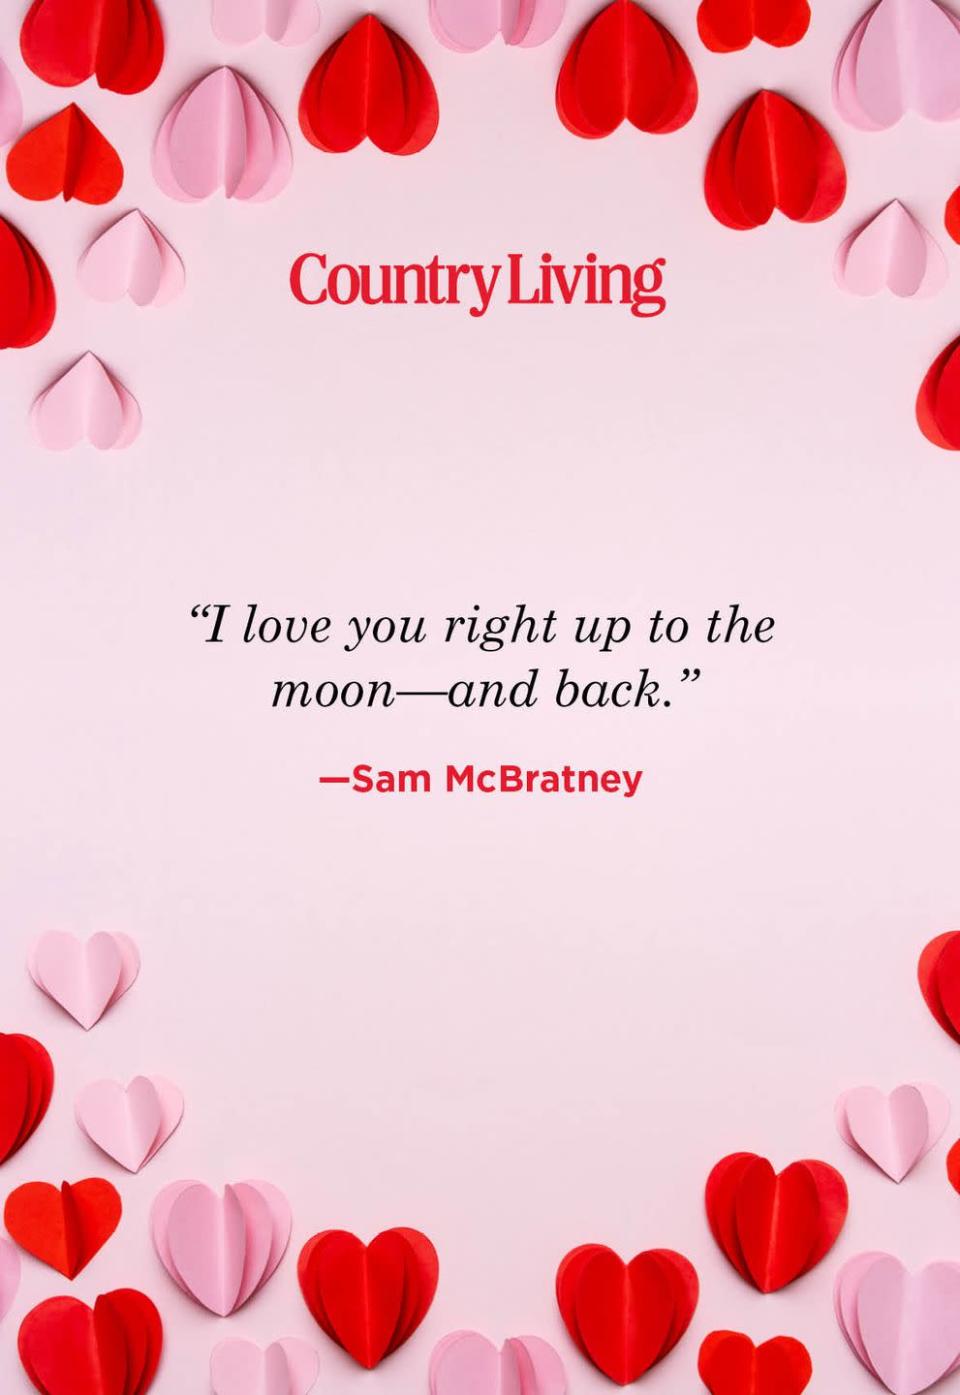 <p>"I love you right up to the moon—and back."</p>